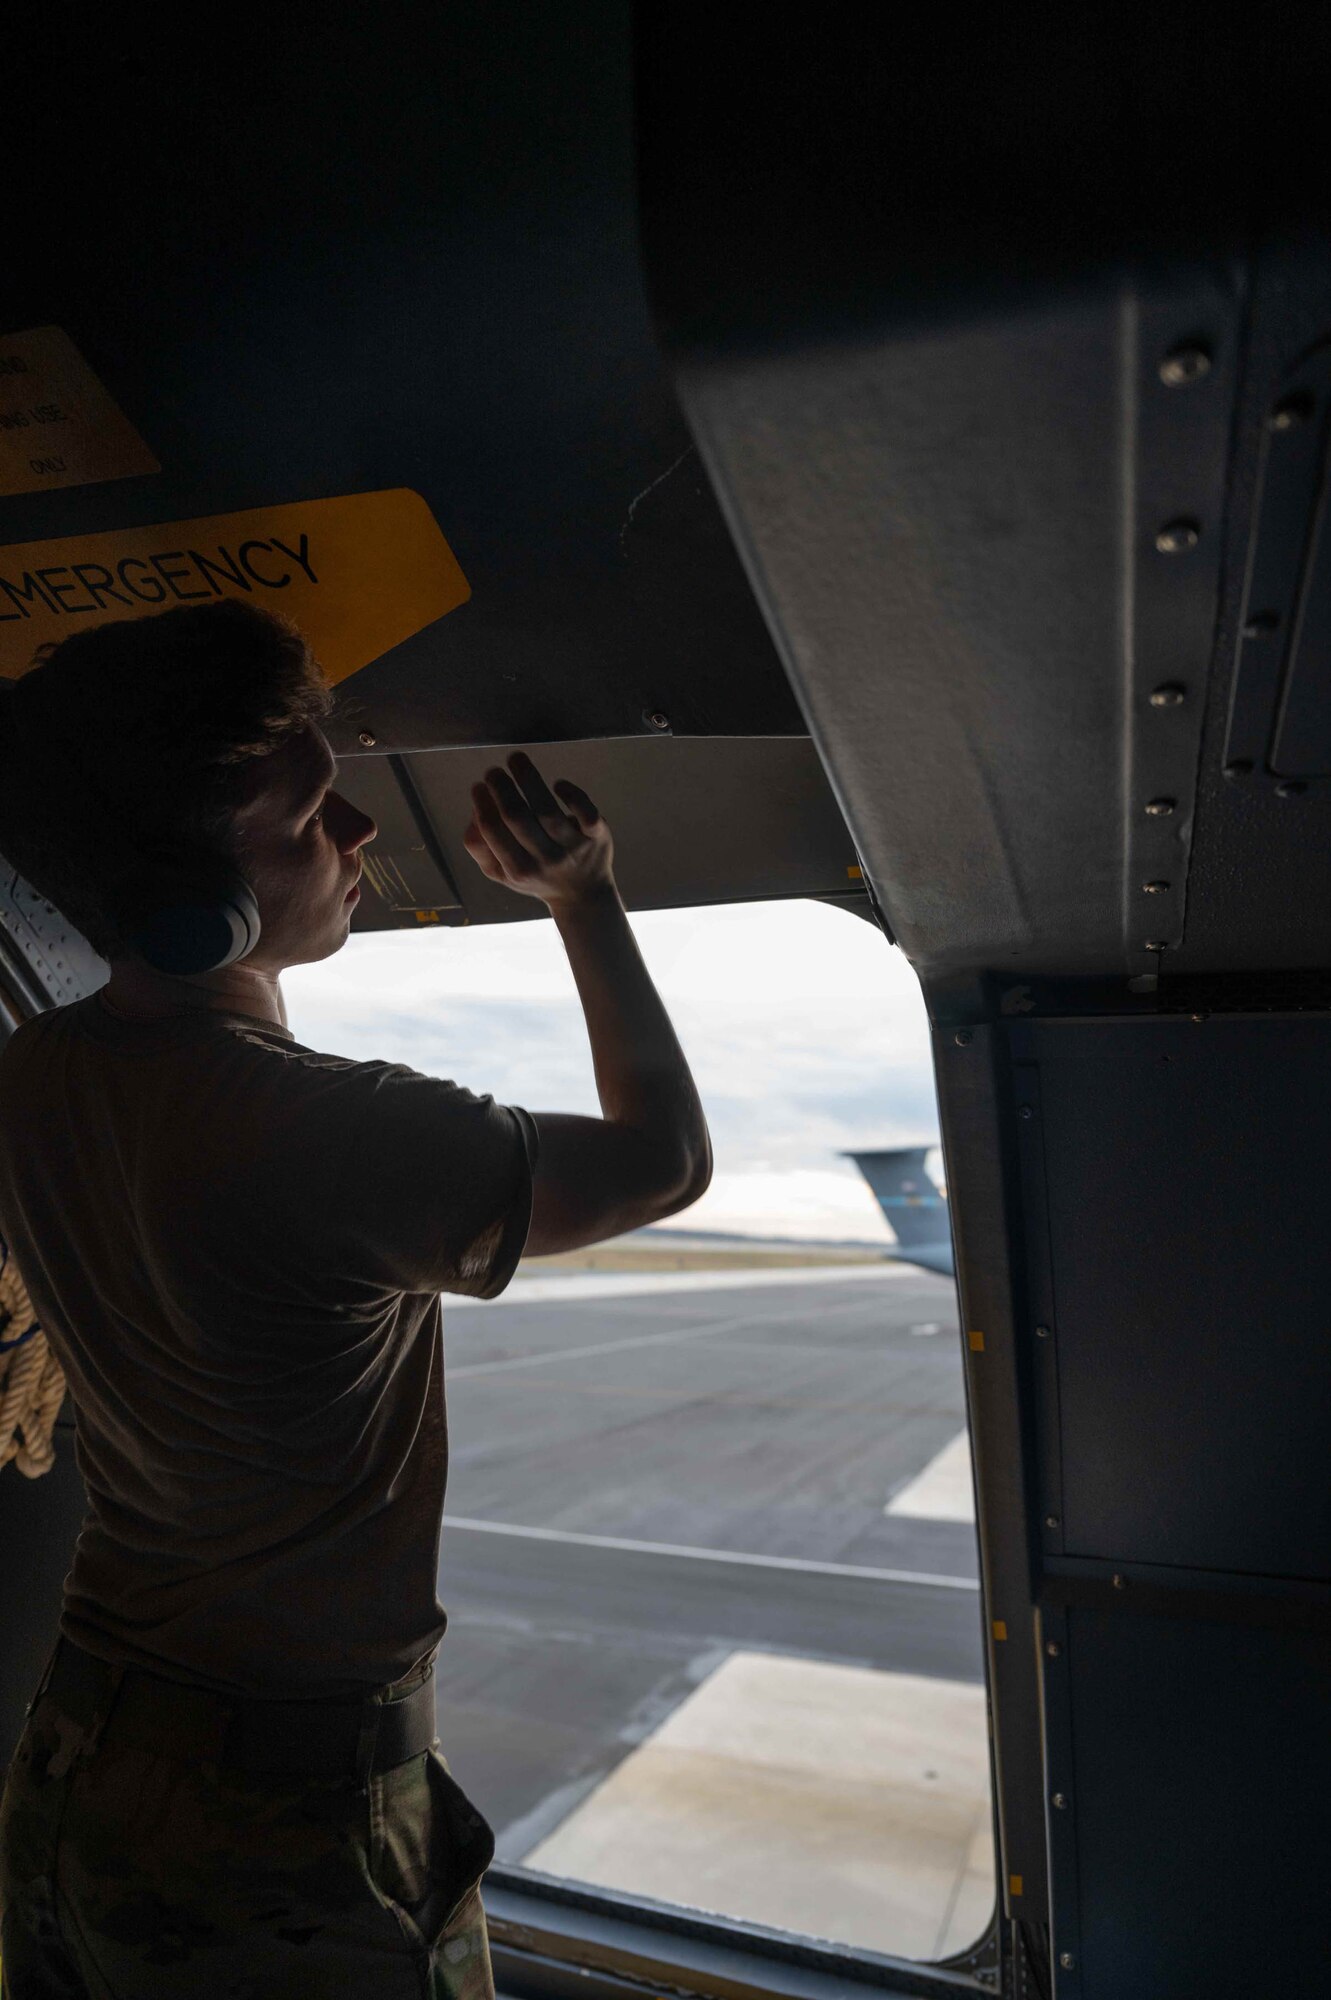 Senior Airman Evan Conway, 9th Airlift Squadron loadmaster, opens an emergency exit in the troop compartment of a C-5M Super Galaxy during pre-flight checks at Dover Air Force Base, Delaware, Dec. 17, 2021. The 9th AS delivered supplies to aid the Joint Base Pearl Harbor-Hickam, Hawaii water quality recovery, a joint U.S. military initiative working closely with the State of Hawaii, Department of Health, Honolulu Board of Water Supply, U.S. government and independent organizations to restore a safe water delivery system to JBPHH military housing communities through testing, treatment, and repair. For detailed information, including available resources and locations, and news, go to www.navy.mil/jointbasewater.      (U.S. Air Force photo by Senior Airman Faith Schaefer)